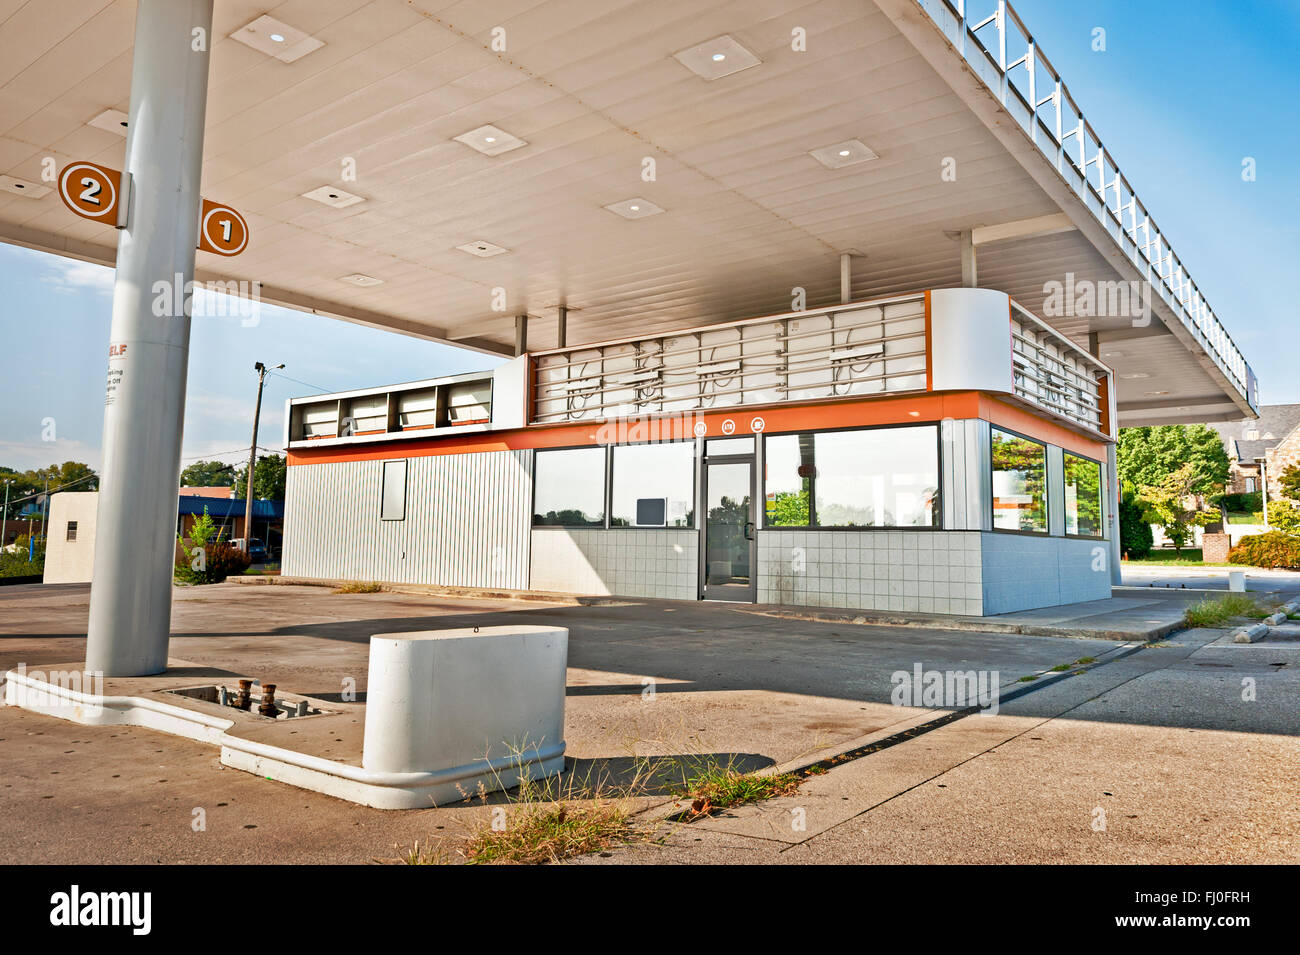 Abandoned Out of Business Gasoline Station Stock Photo